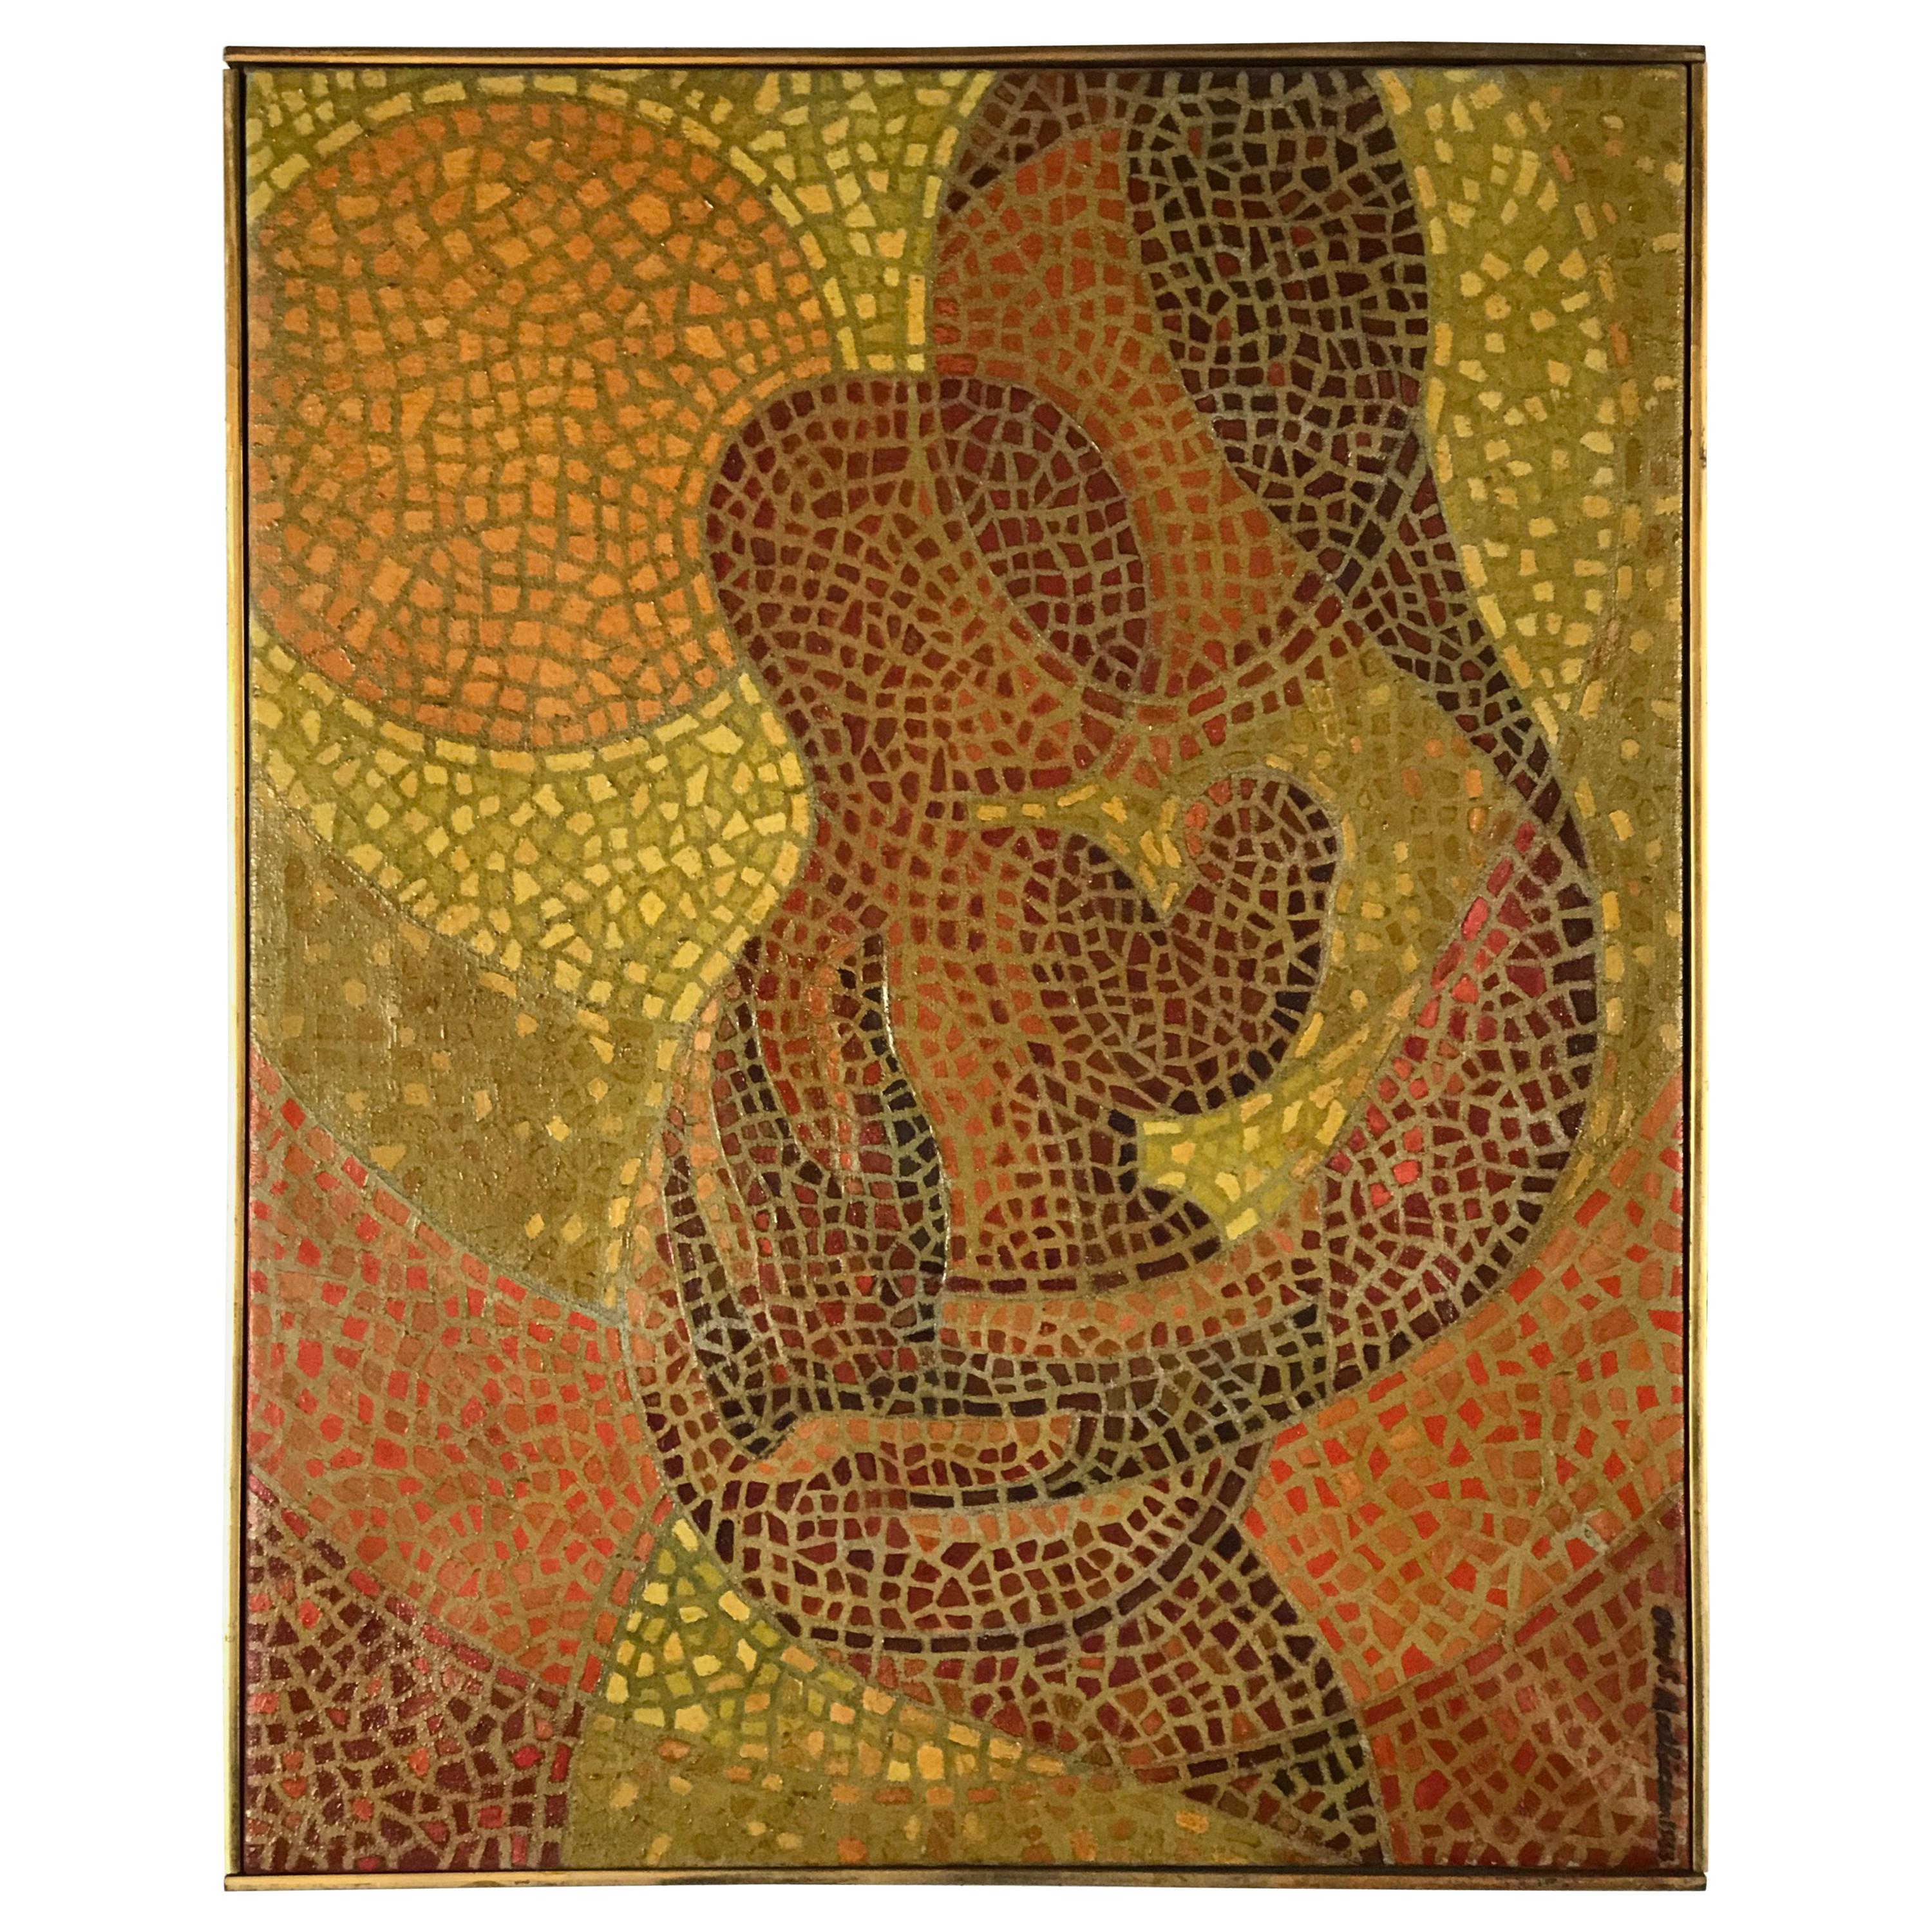 Madonna Mother & Child Mosaic Painting by Olav Mathiesen, Oil on Canvas, 1963